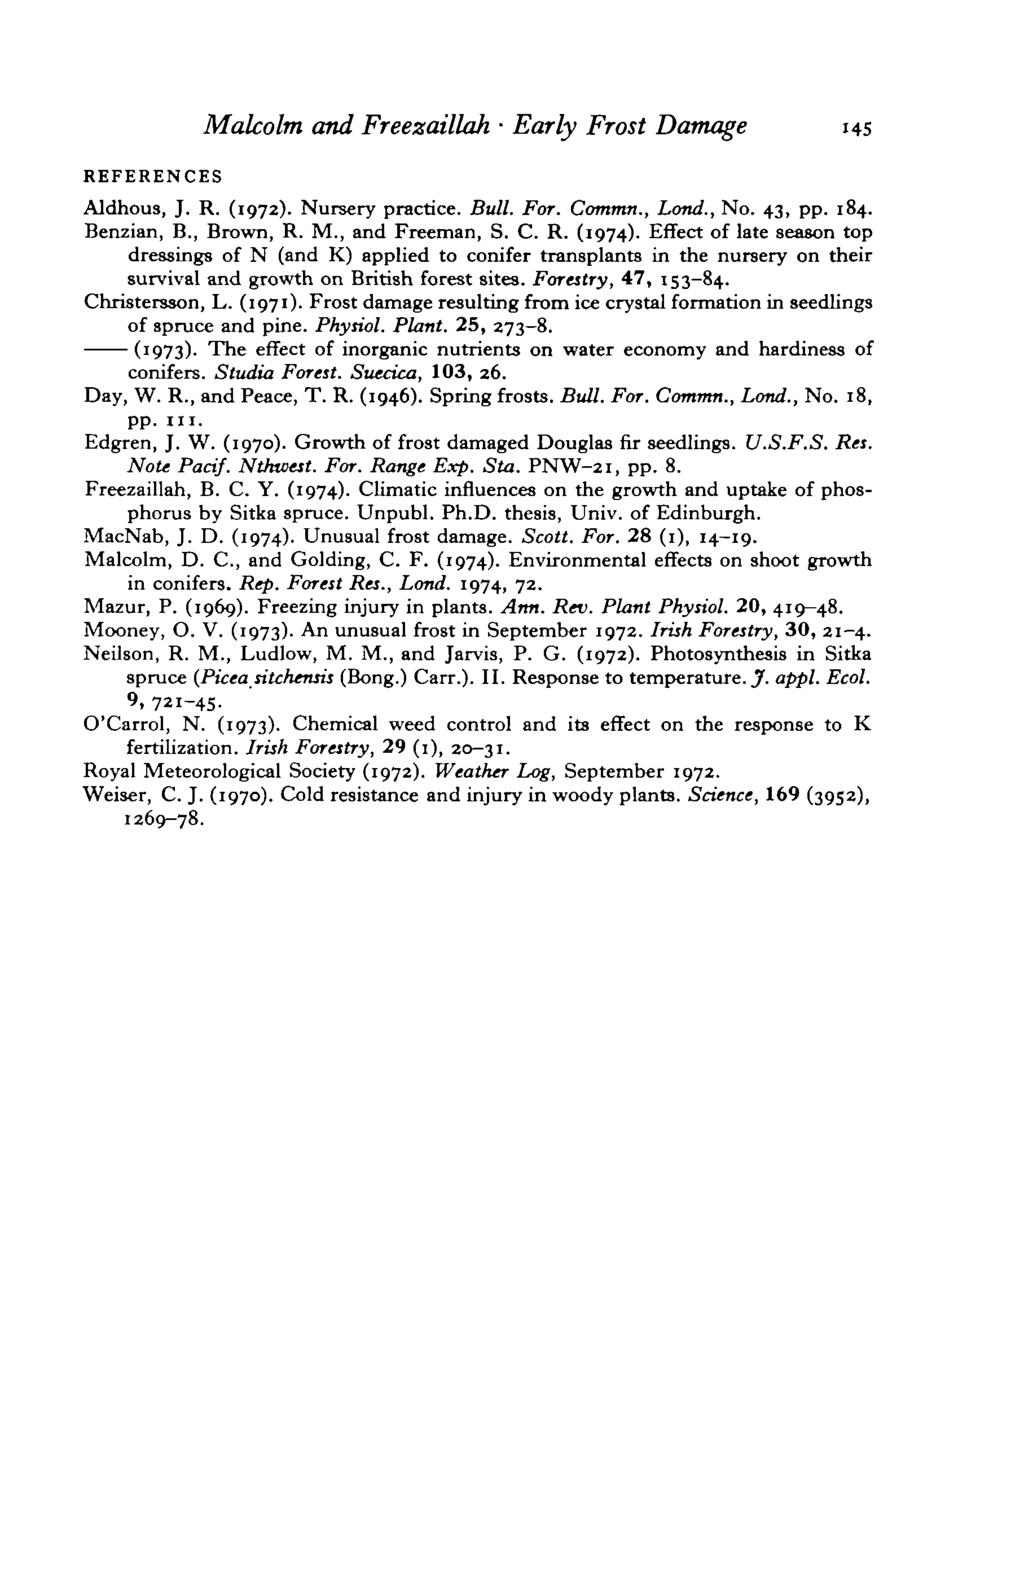 Malcolm and Freezaillah Early Frost Damage 45 REFERENCES Aldhous, J. R. (972). Nursery practice. Bull. For. Cotmtm., Land., No. 43, pp. 84. Benzian, B., Brown, R. M., and Freeman, S. C. R. (974).